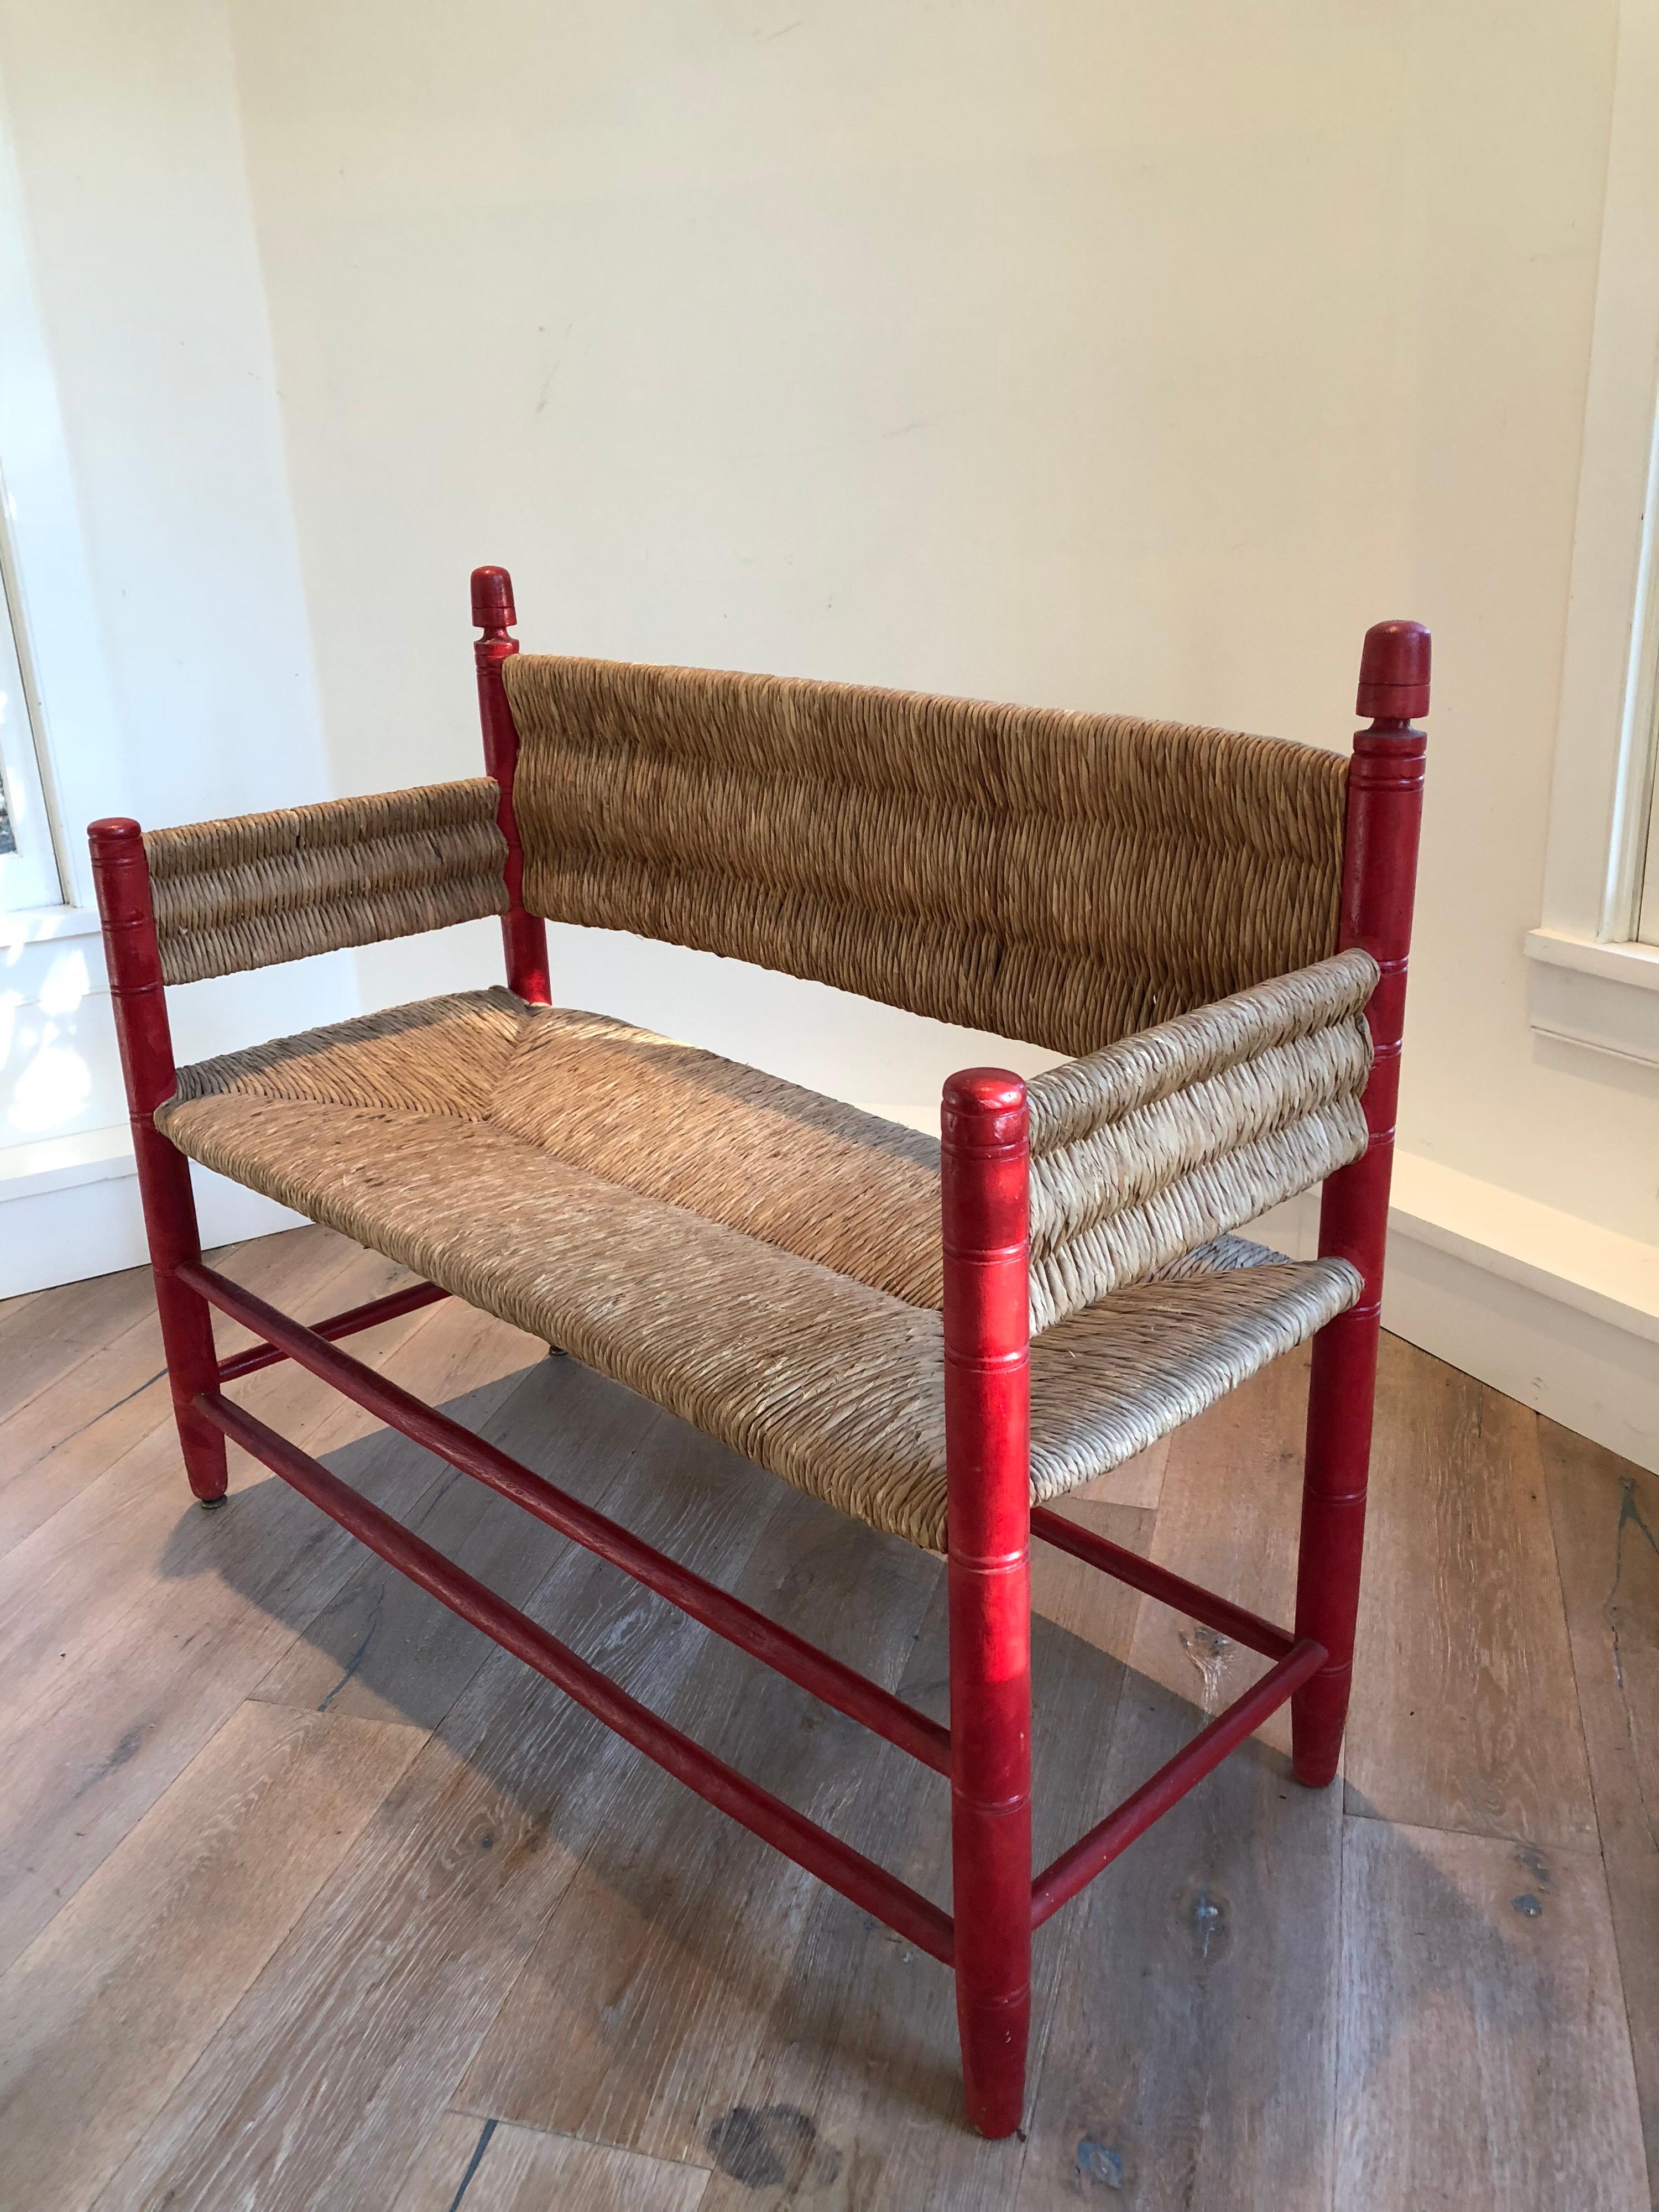 A walnut rush seat bench or settee with red painted frame. Sturdy construction and comfortable.